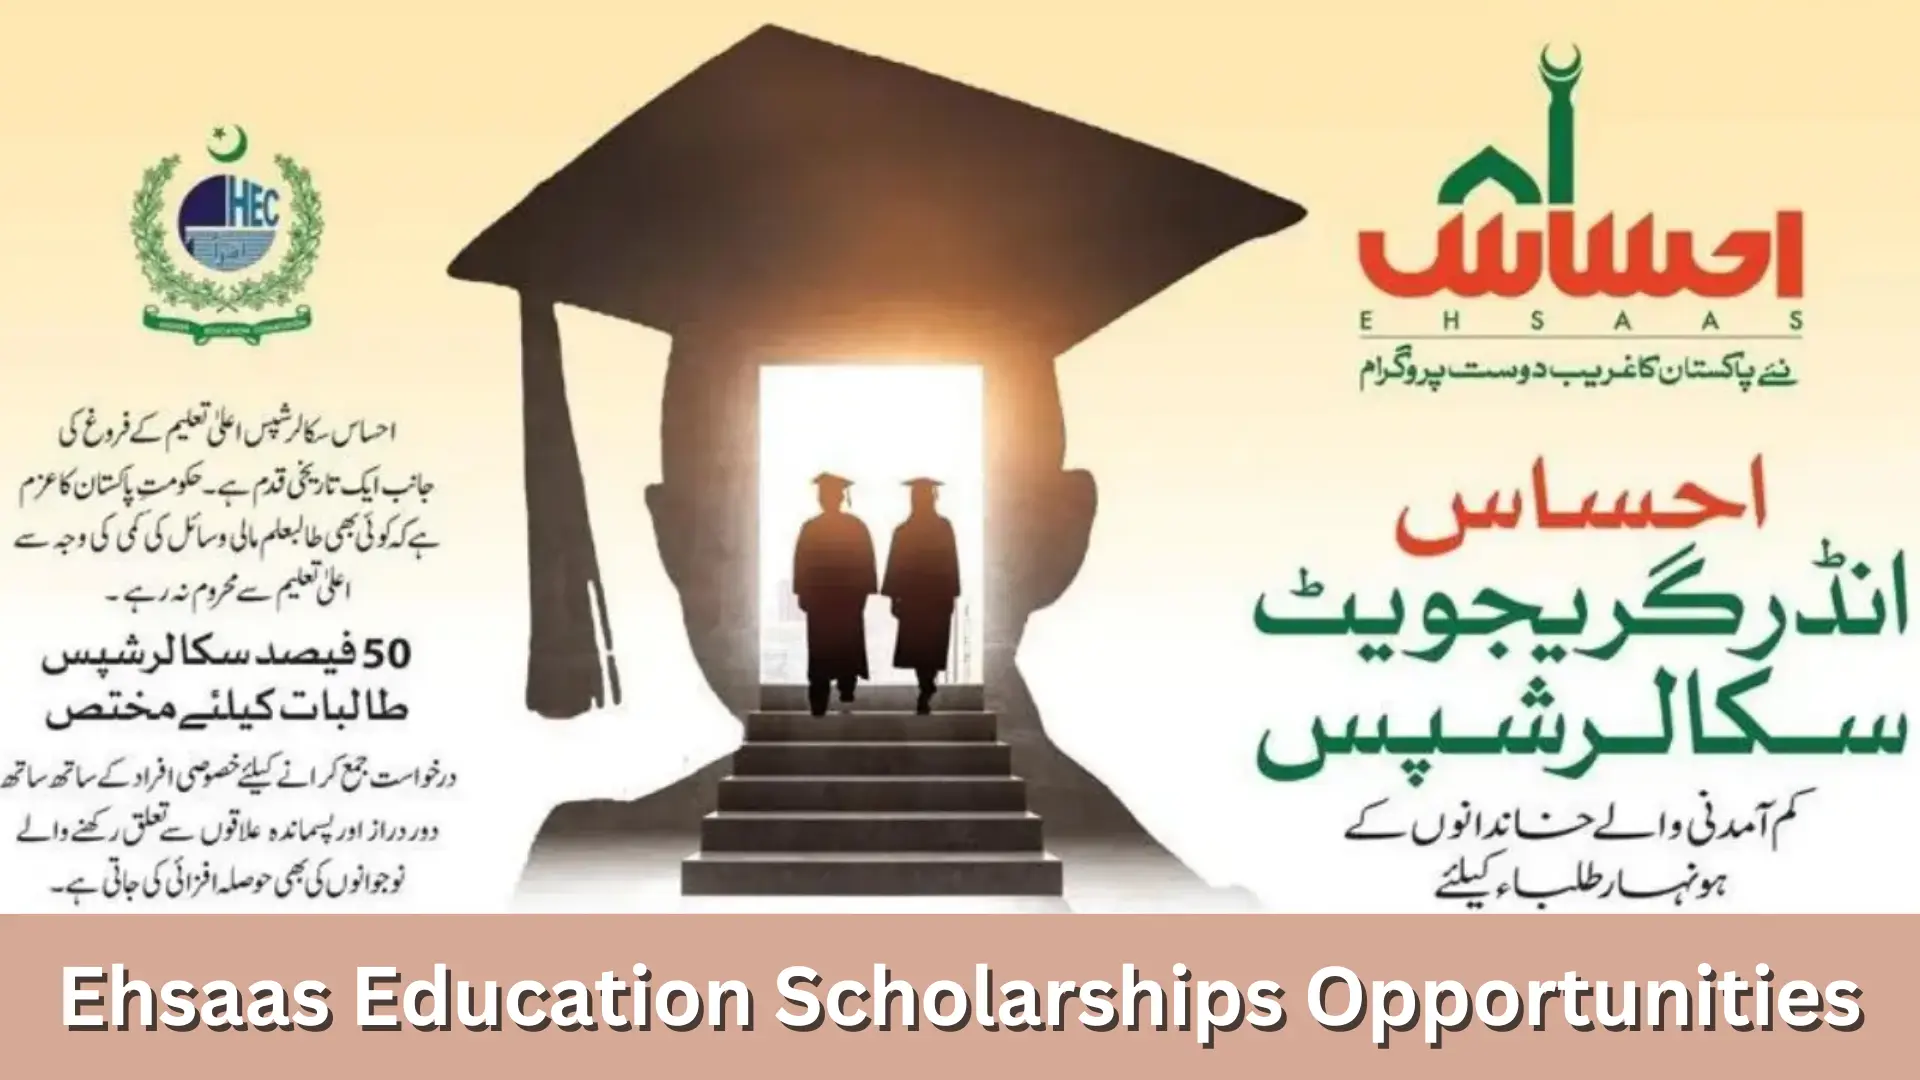 Ehsaas Education Scholarships Opportunities